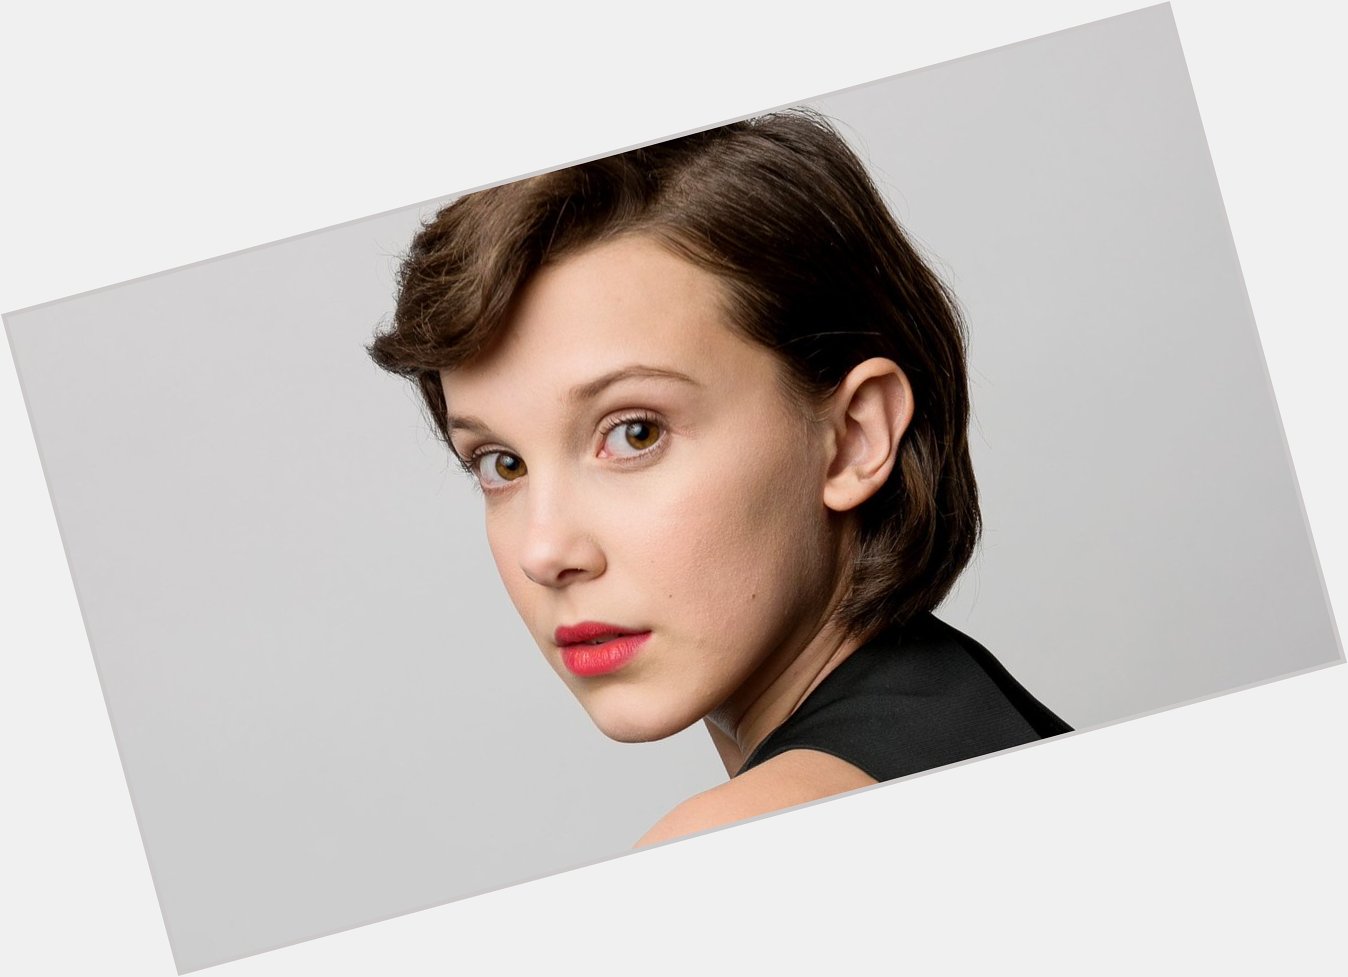 Happy 16th Birthday to Millie Bobby Brown. We love having Millie at our BAFTA teas and award shows. 